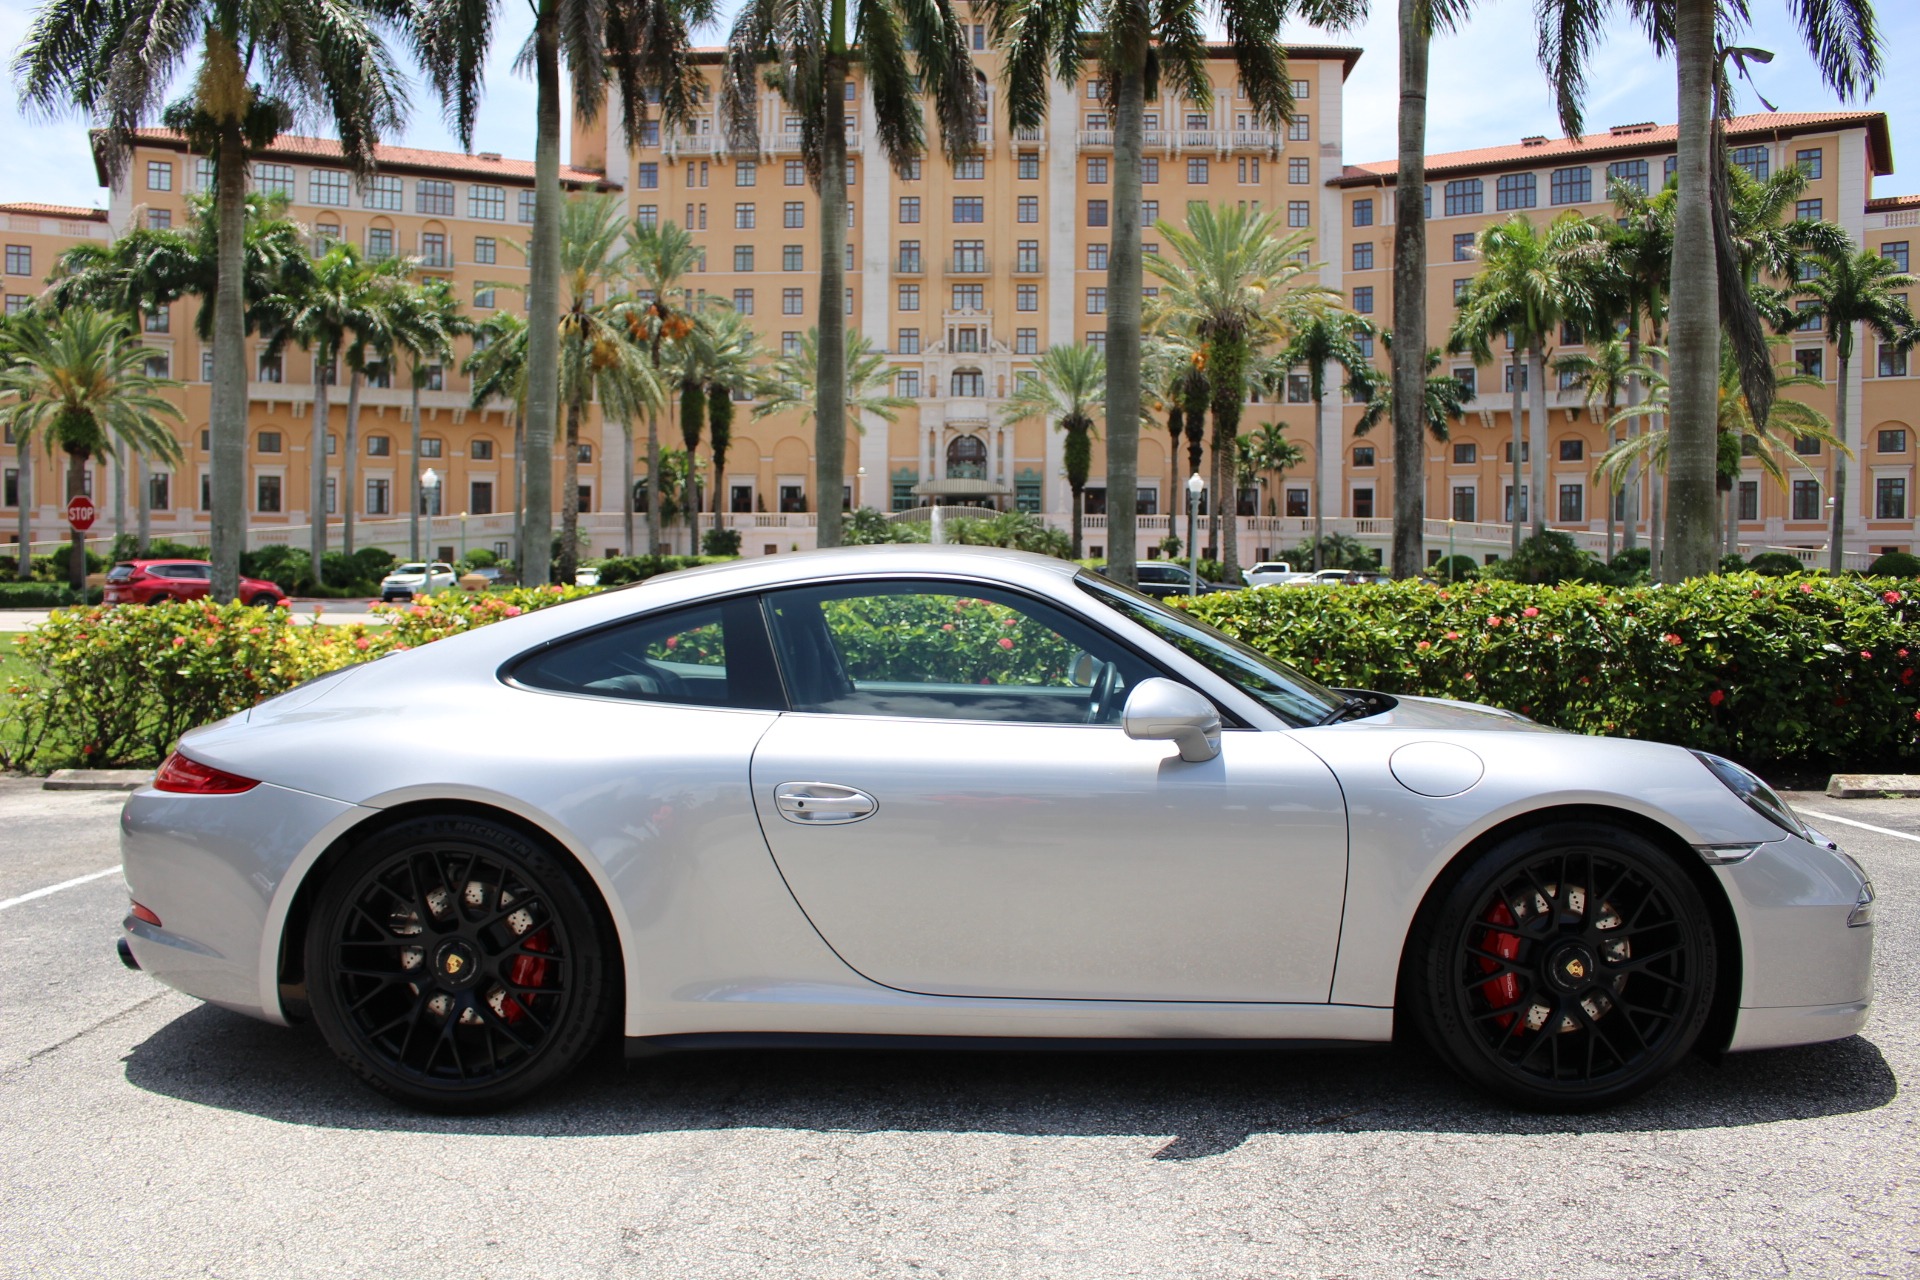 Used 2016 Porsche 911 Carrera GTS for sale Sold at The Gables Sports Cars in Miami FL 33146 4